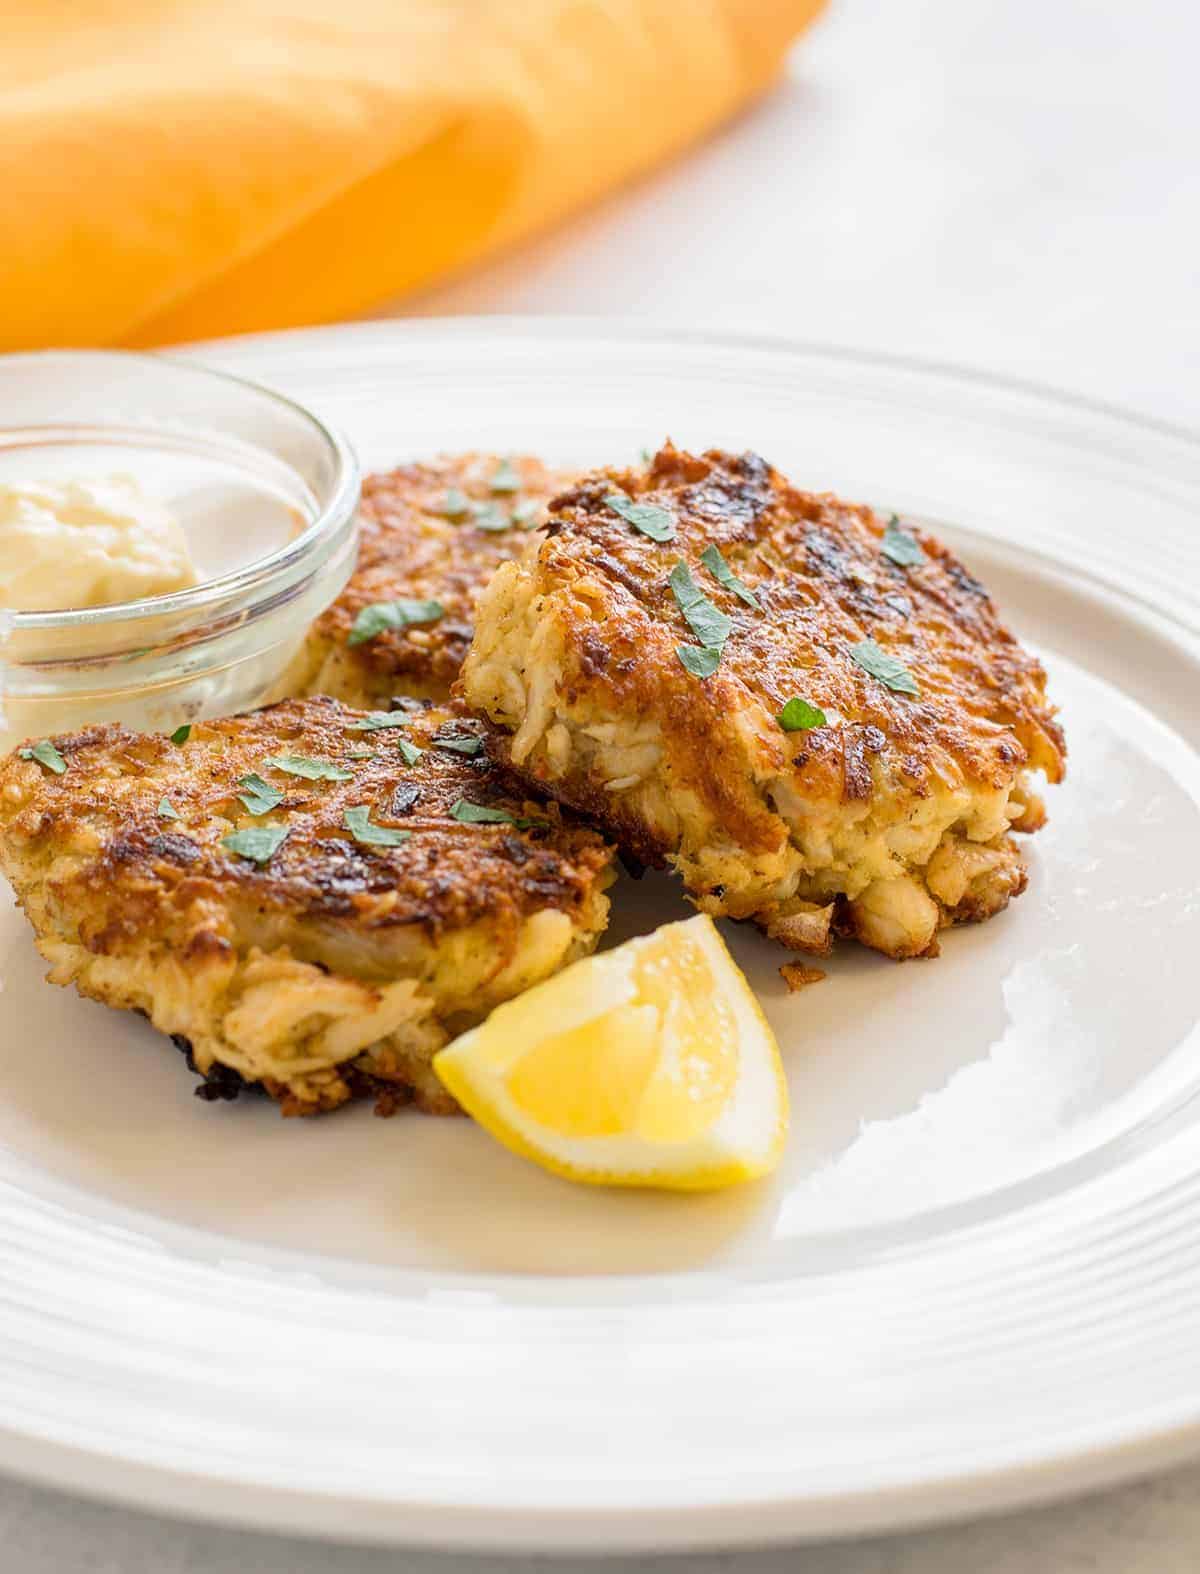 Scrumptious Gluten-Free Crab Cakes on a white plate.